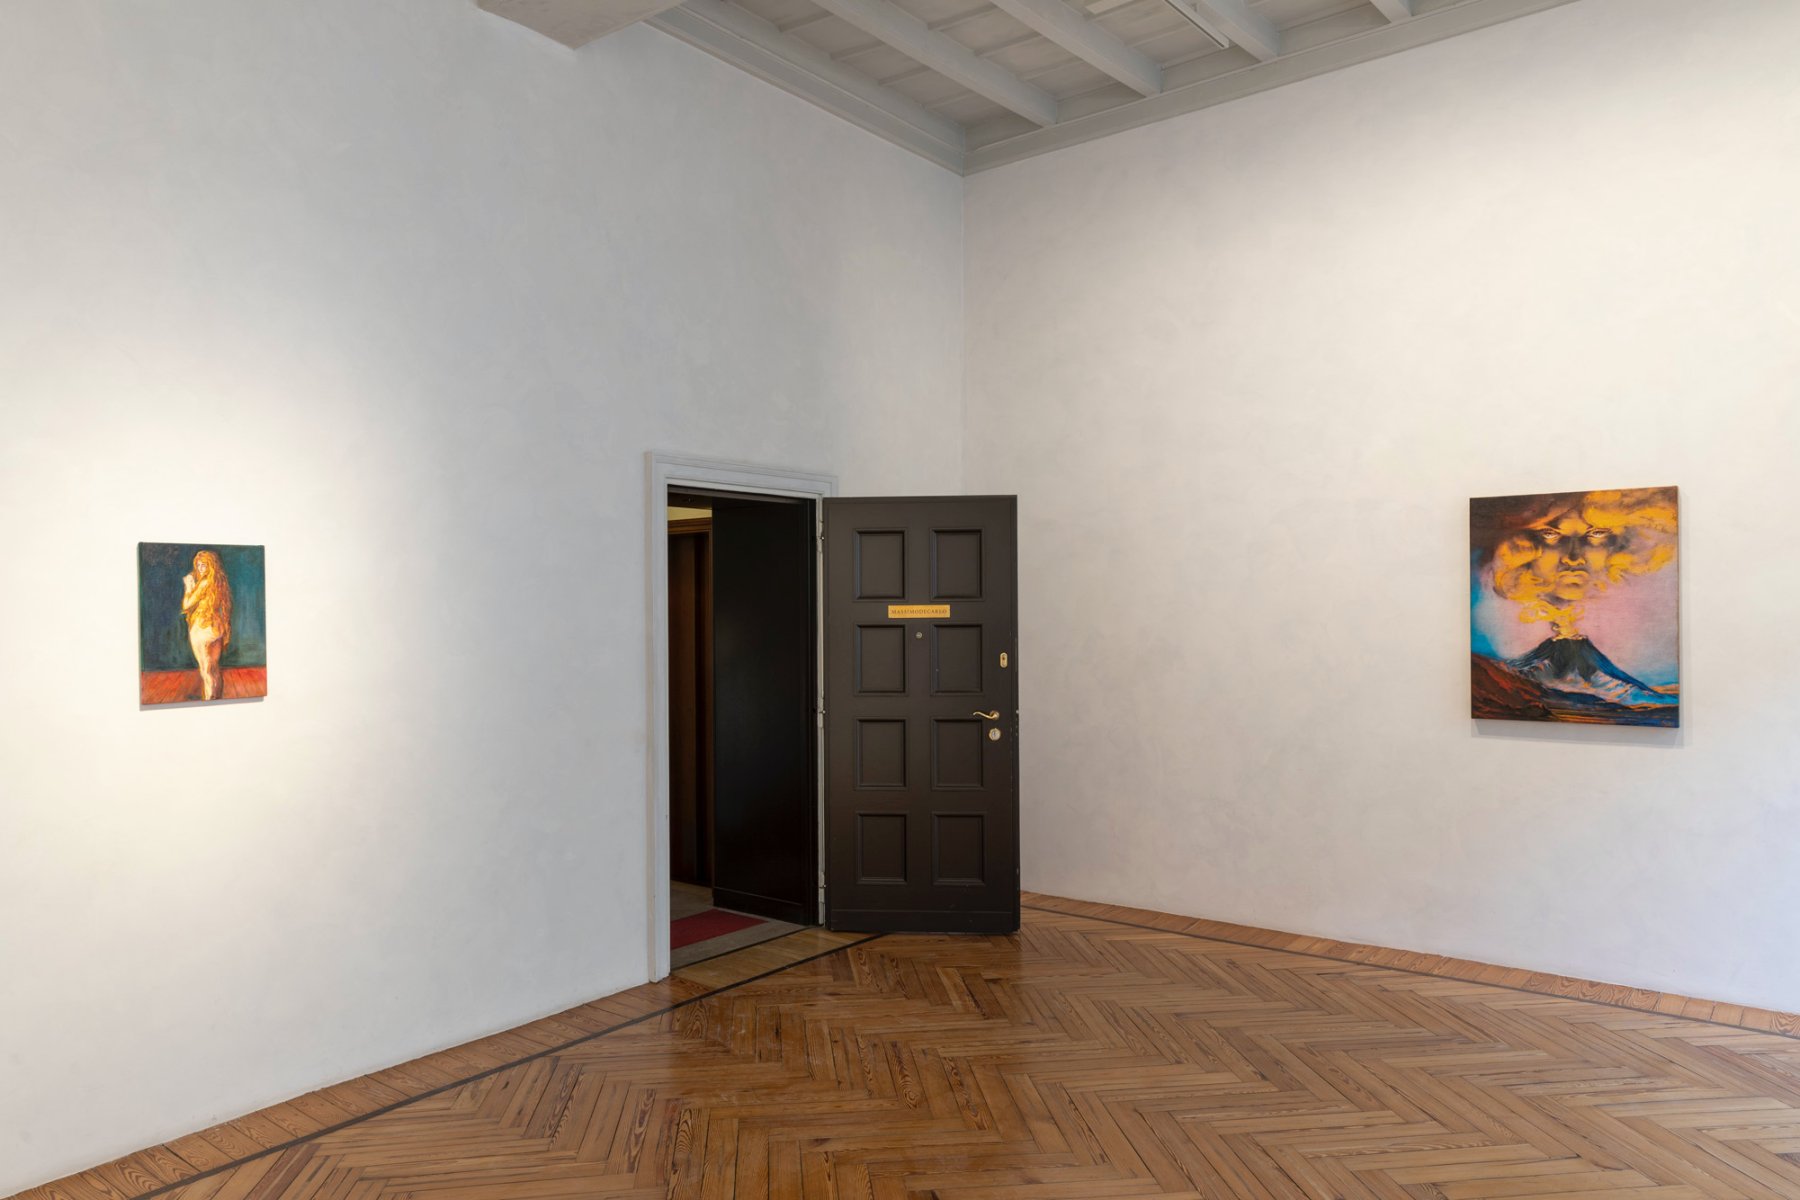 Installation image for Piotr Uklanski: How they met themselves, at MASSIMODECARLO